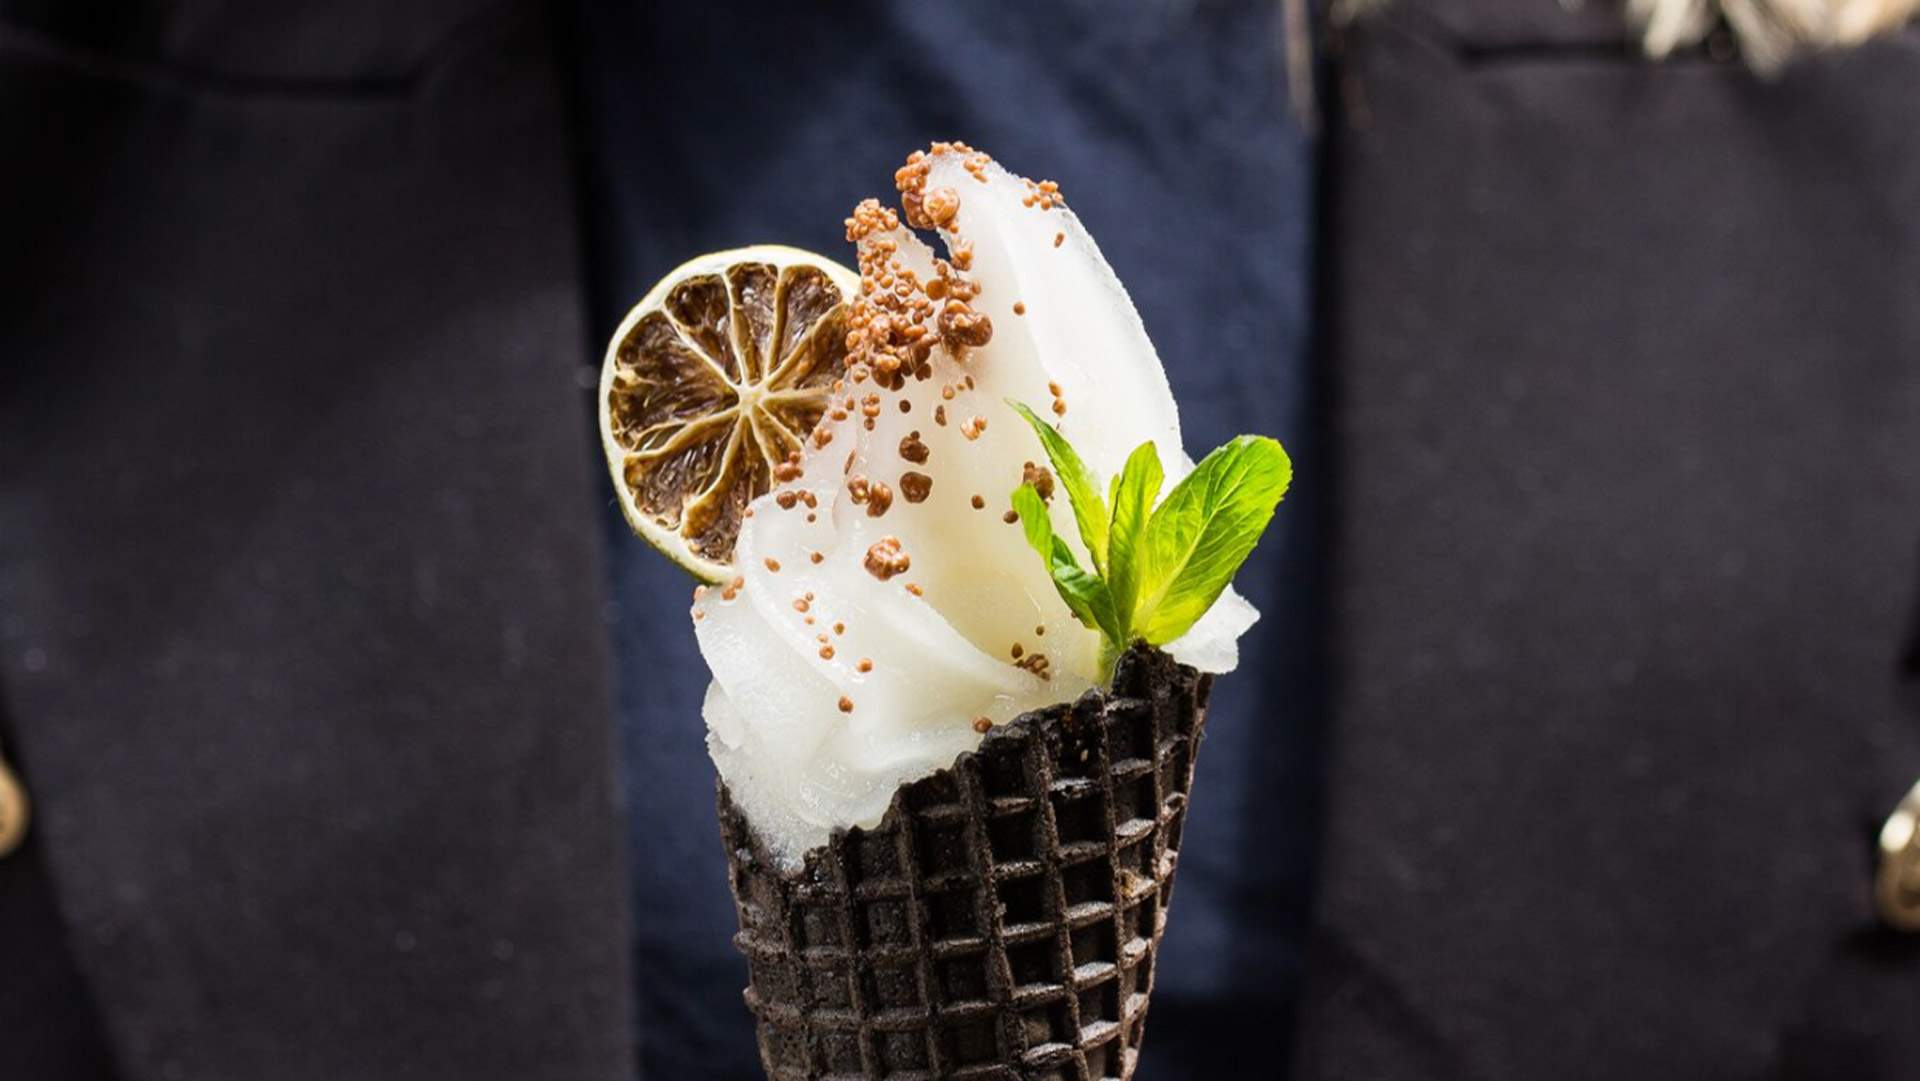 Chippendale's Gin Lane Has Launched a New Range of Gin-Infused Soft Serves for Summer